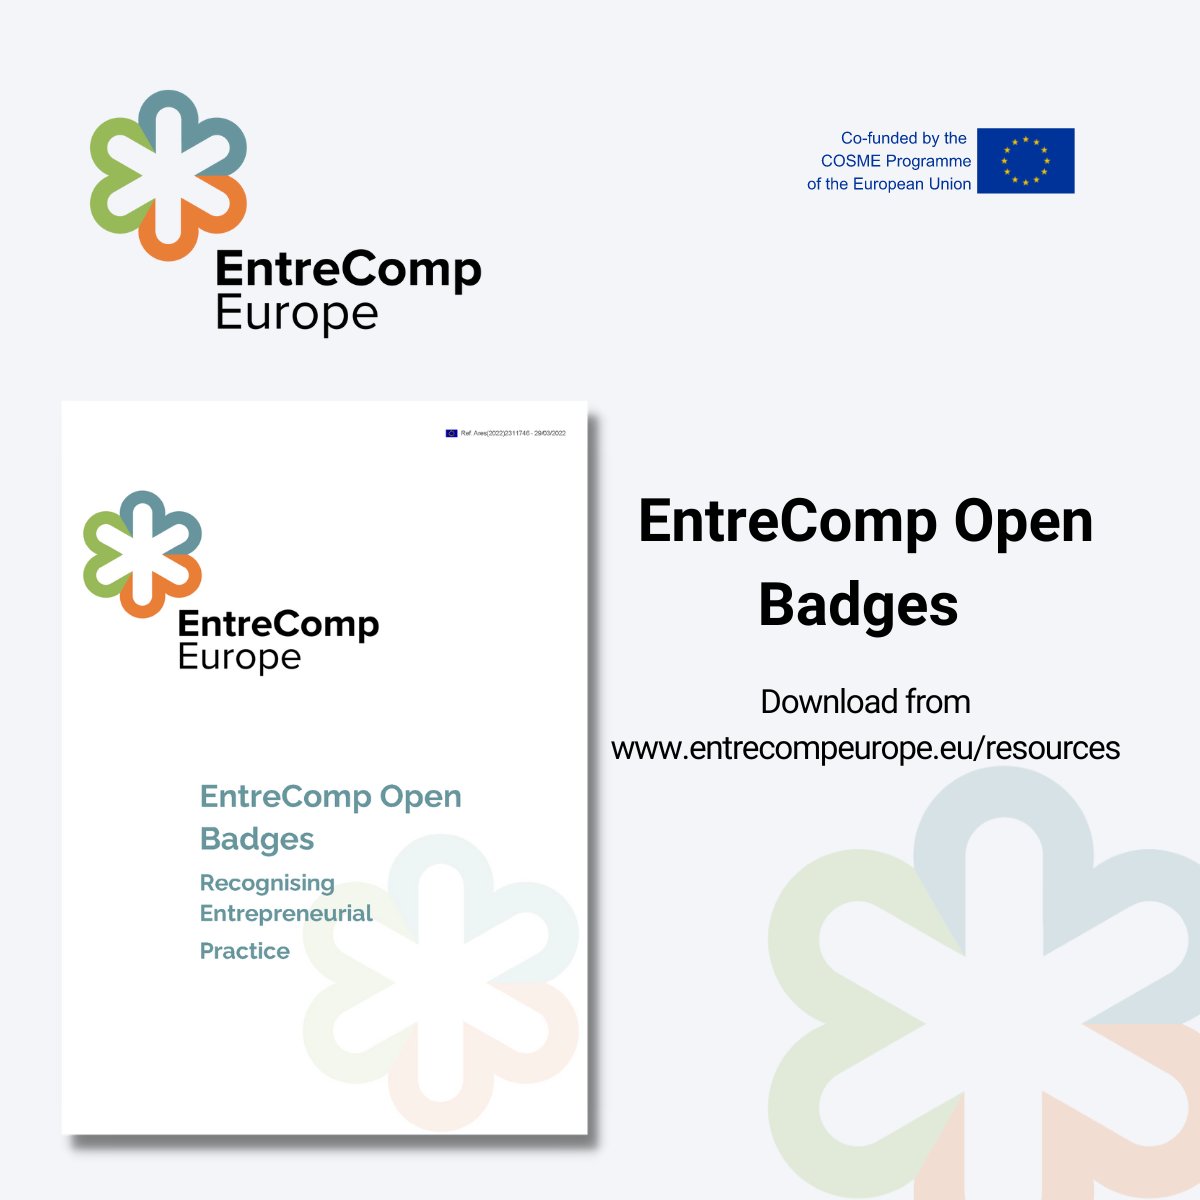 Learn. Share. Connect. Get recognised. You can do all this and more with the #EntreComp Open Badges from @EntreCompEurope. To find out more about the development and design take a look at ‘Recognising Entrepreneurial Practice’. Download now from 👉 entrecompeurope.eu/resources